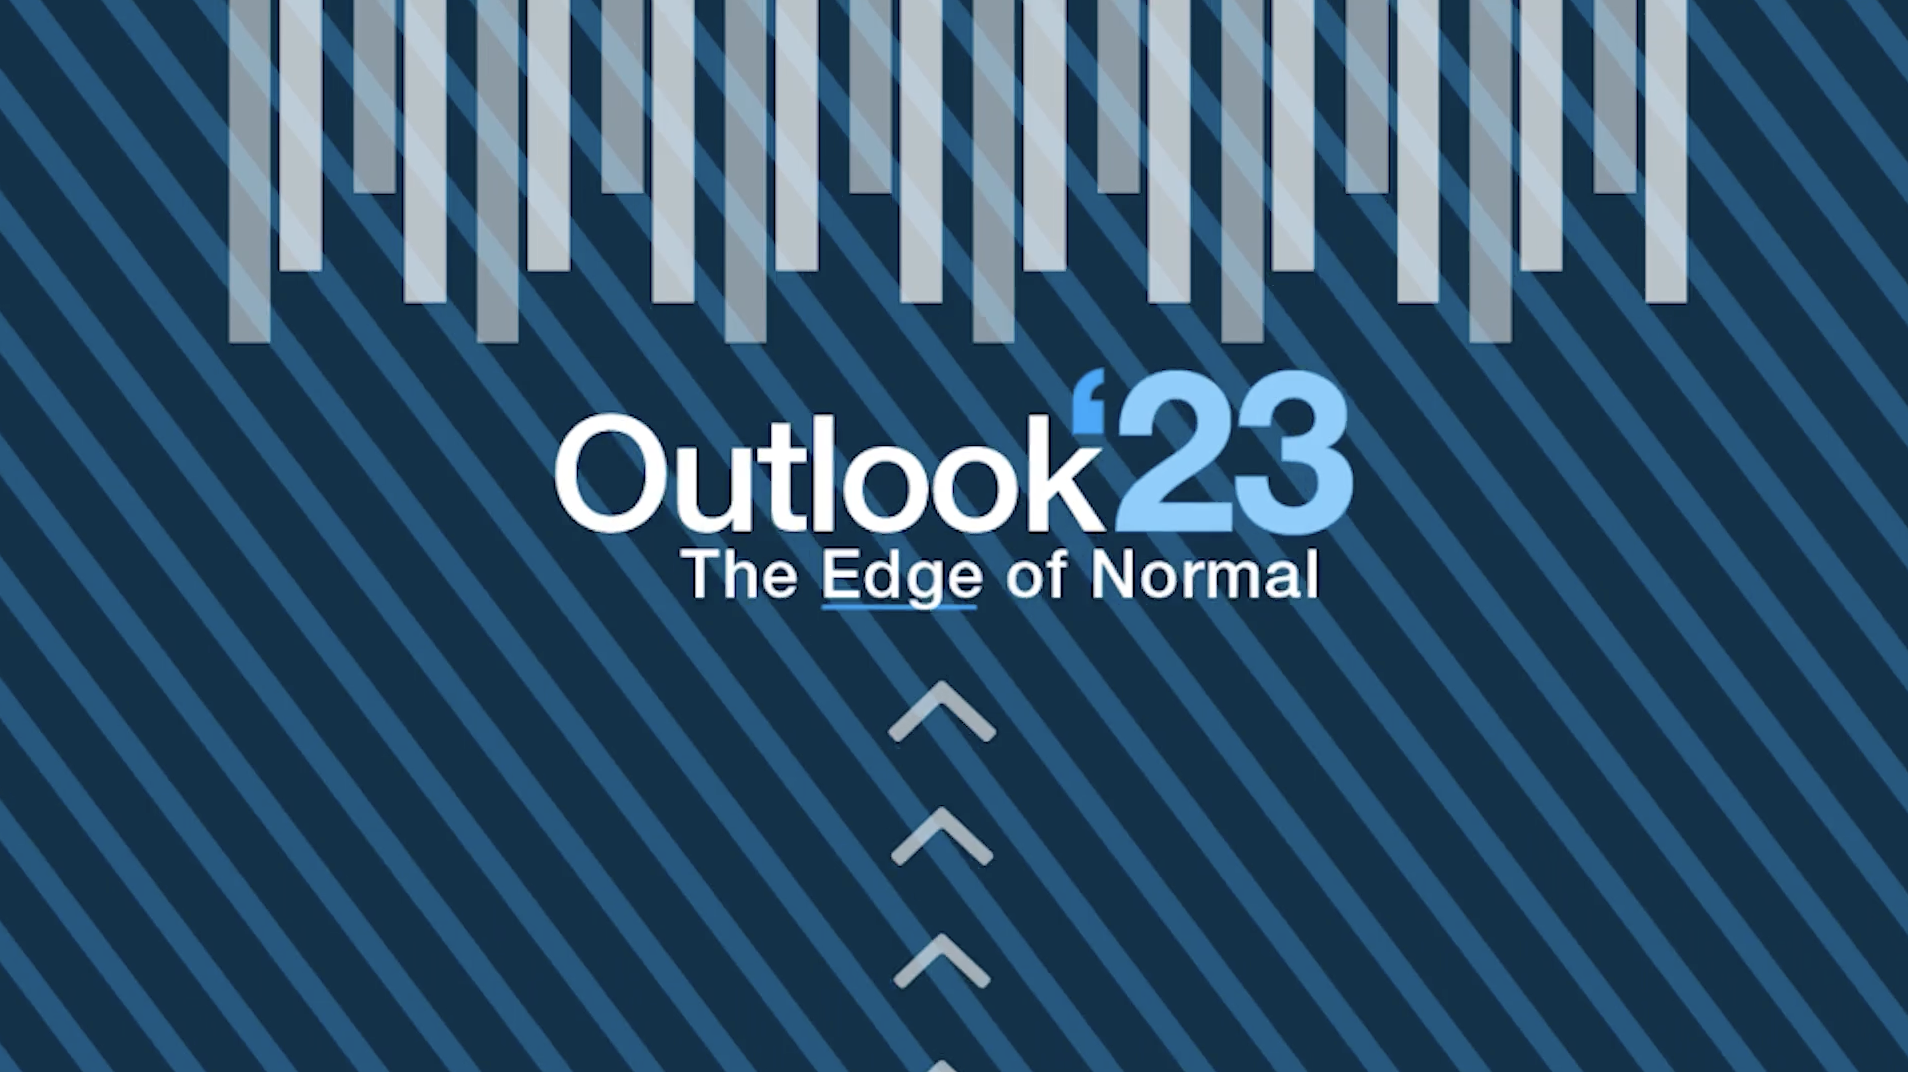 Outlook '23 the Edge of Normal